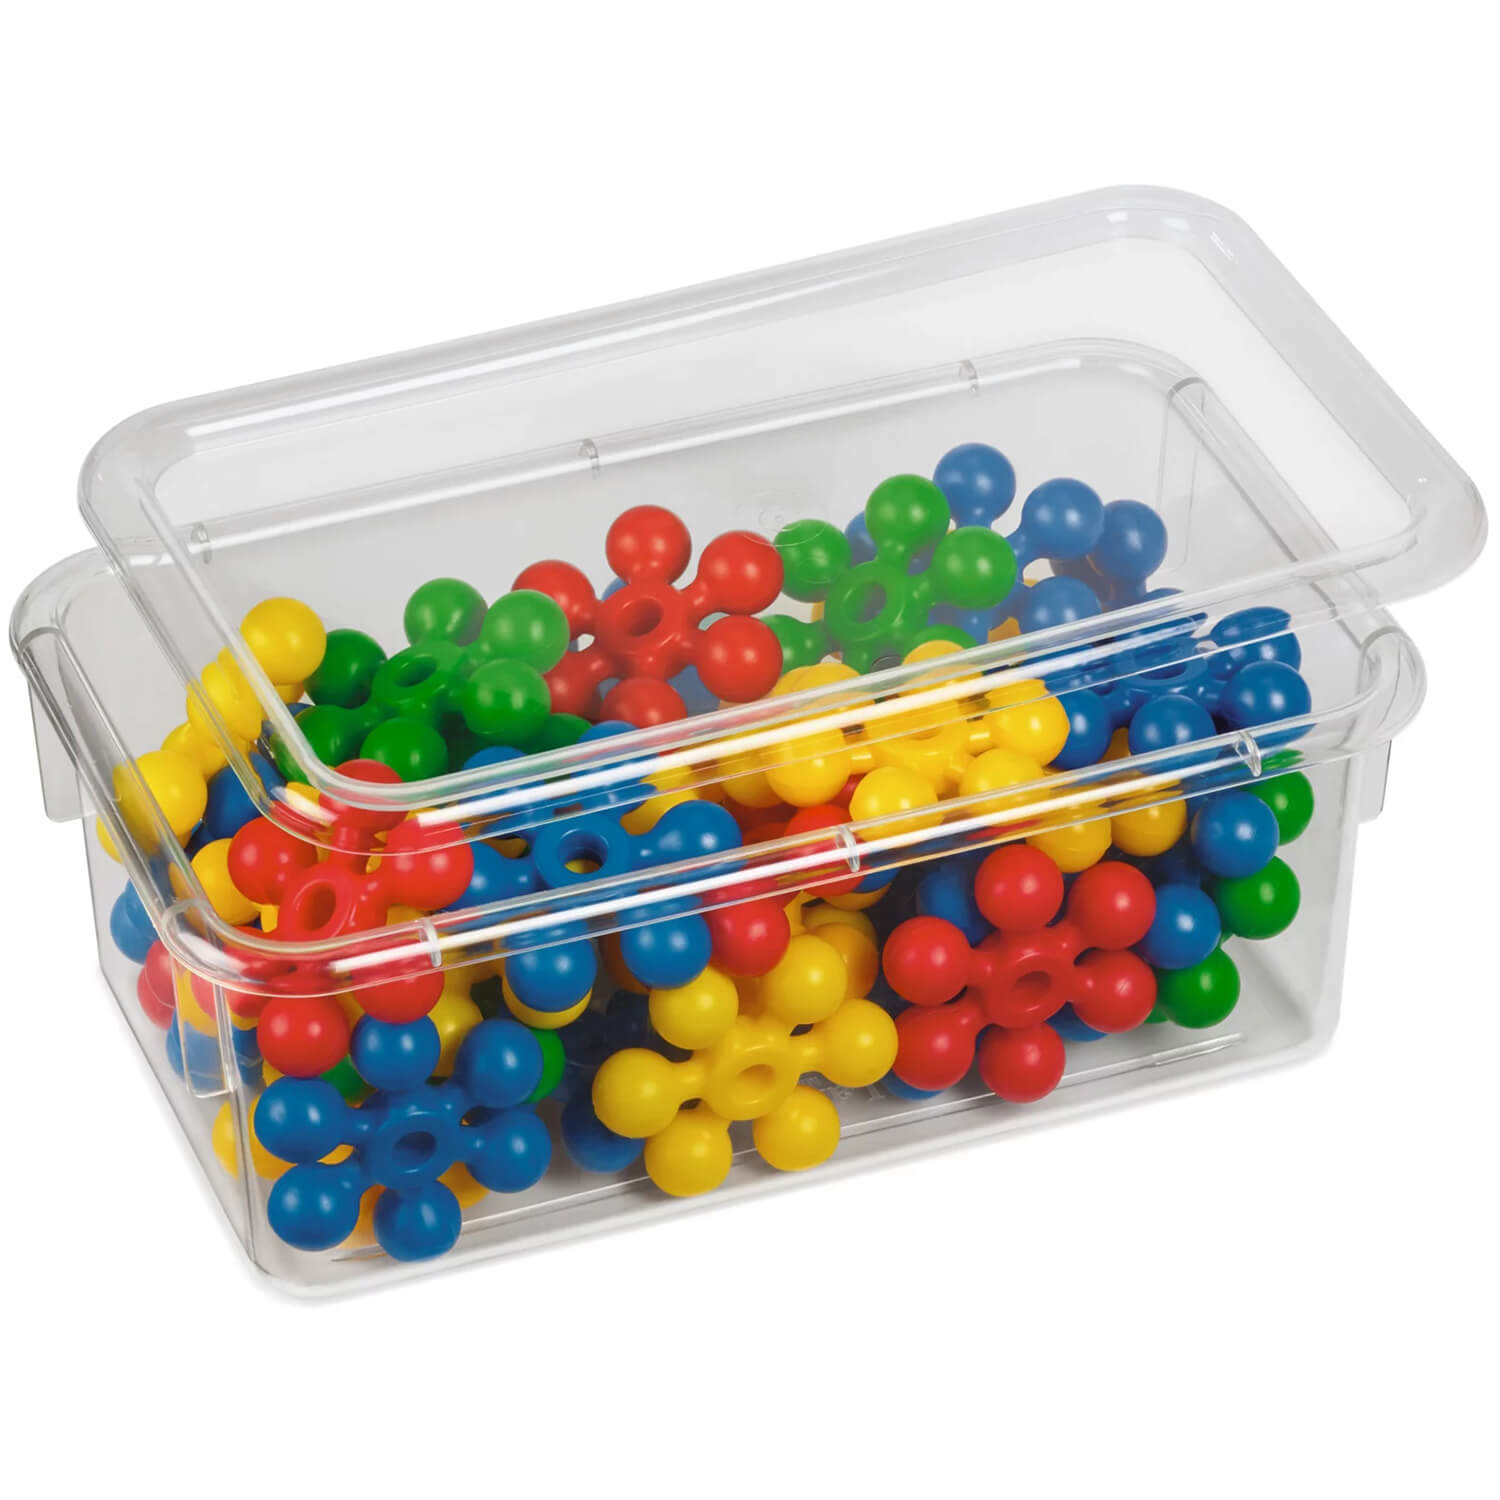 W17263193 Clear-View Storage Box with Lid